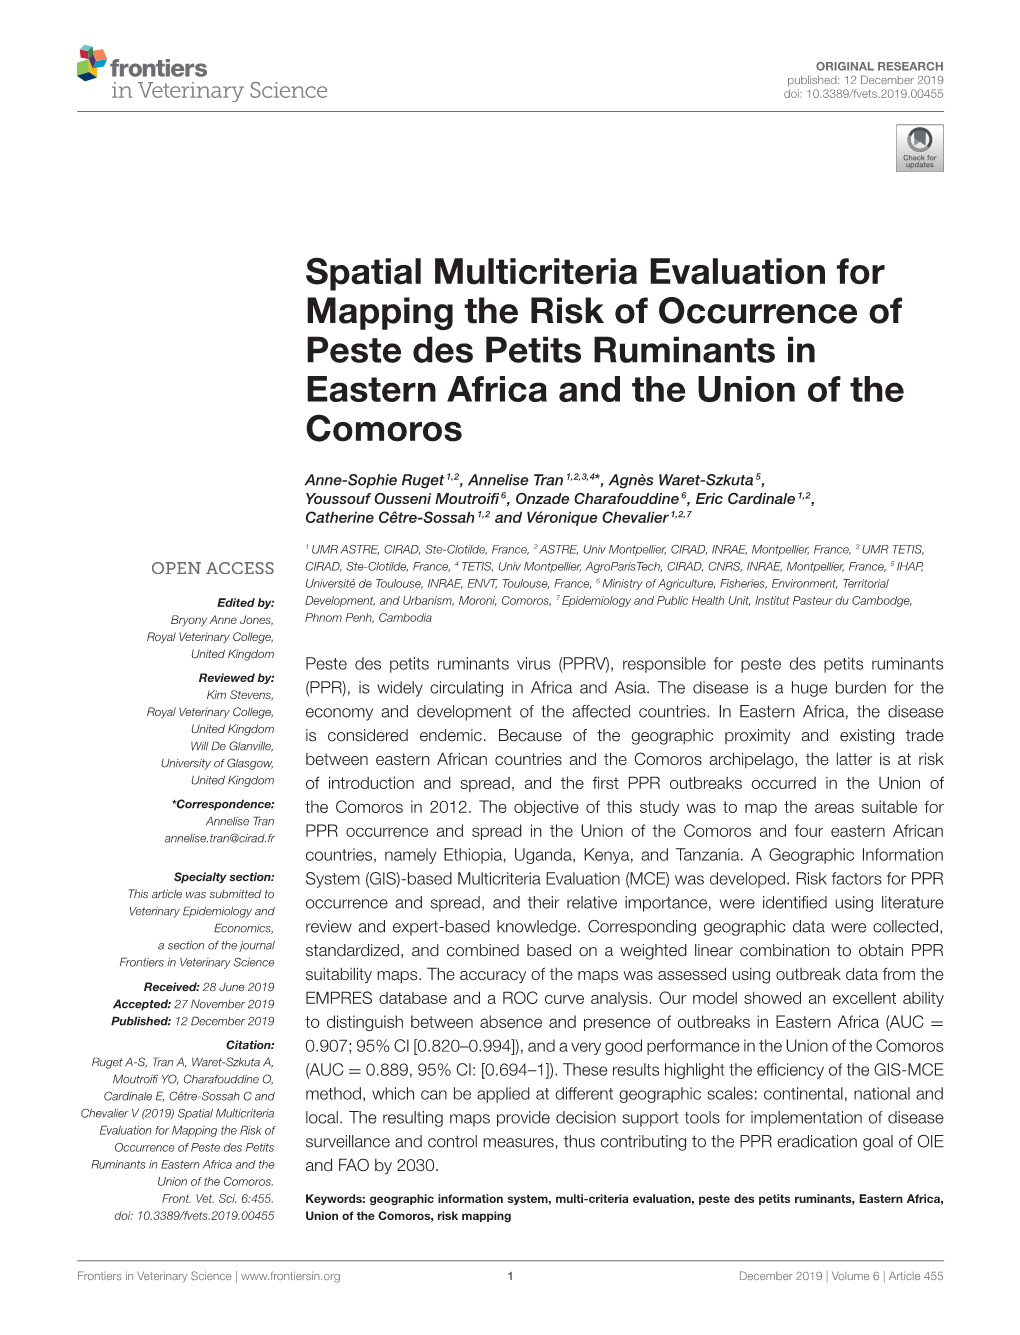 Spatial Multicriteria Evaluation for Mapping the Risk of Occurrence of Peste Des Petits Ruminants in Eastern Africa and the Union of the Comoros